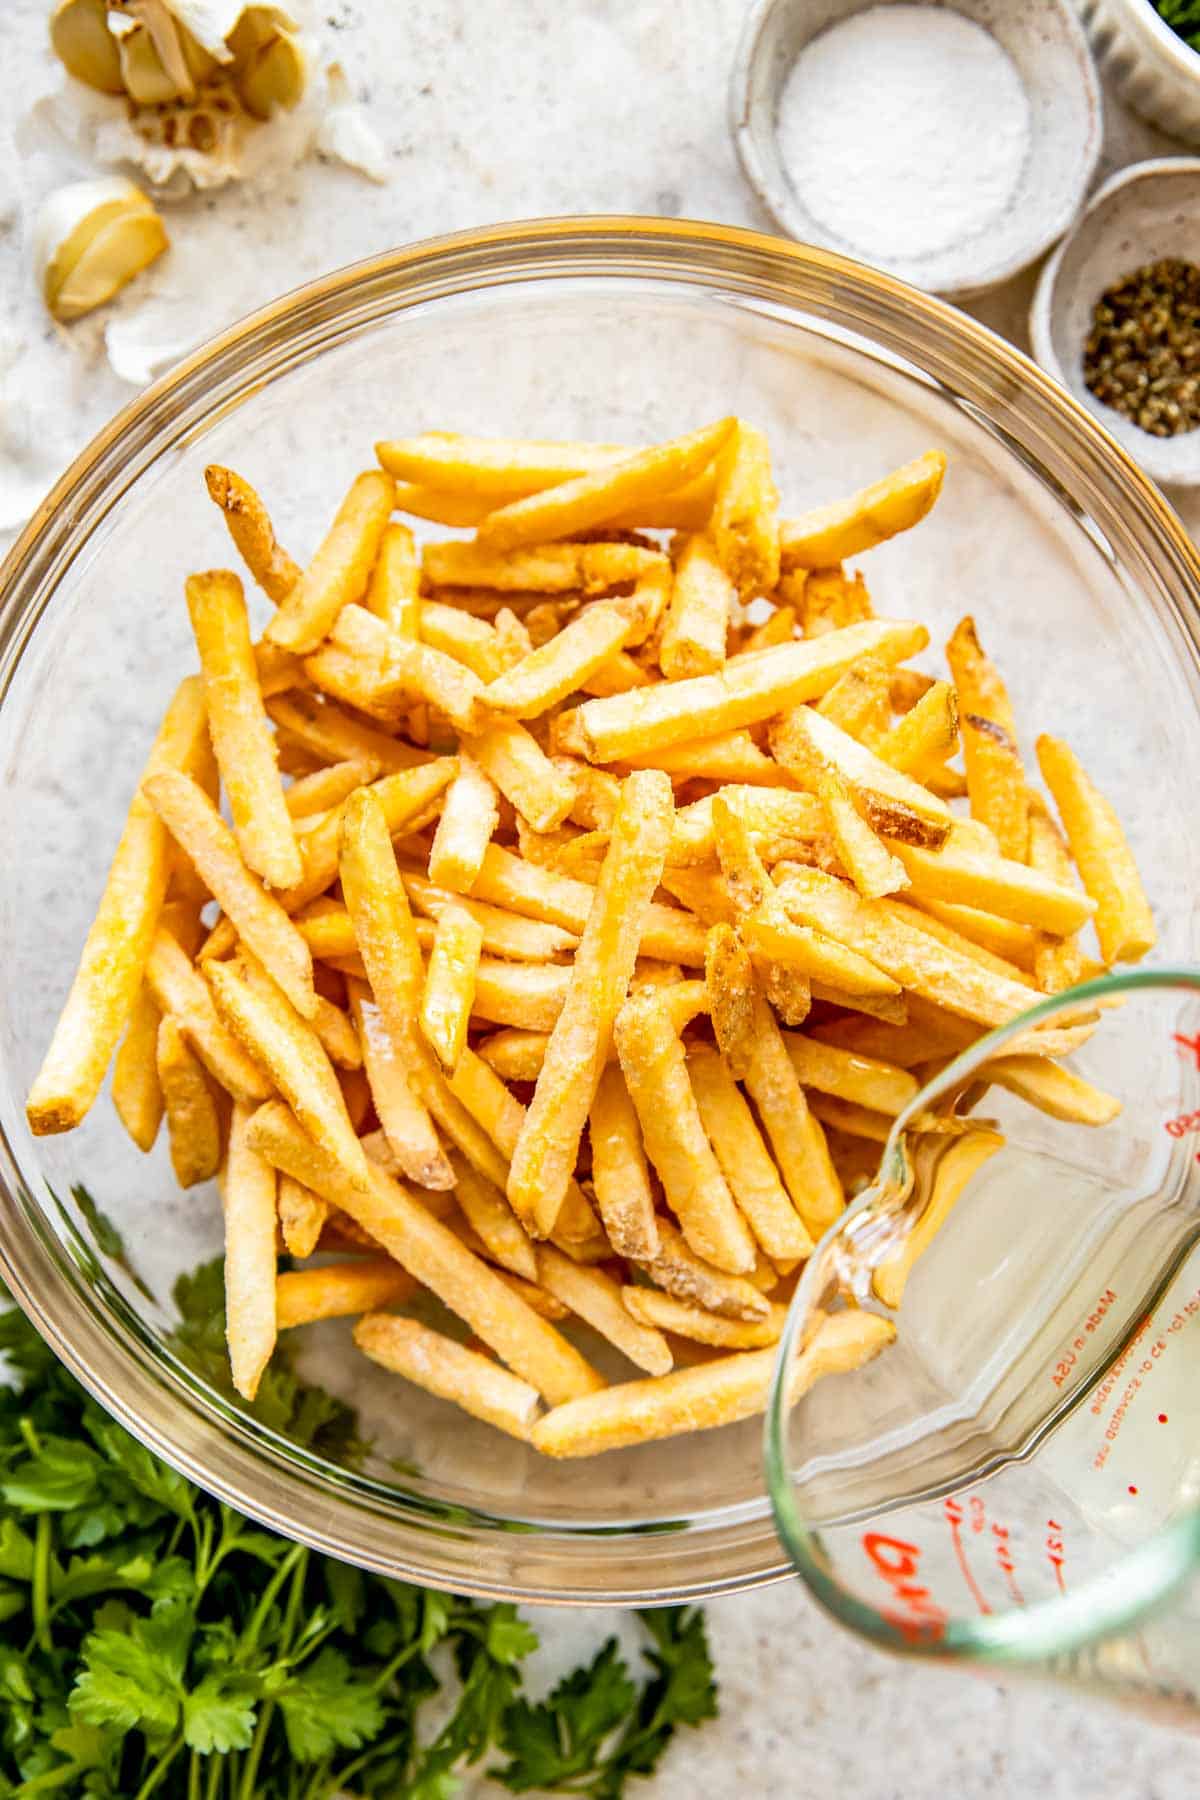 Fries are presented in a glass bowl. 